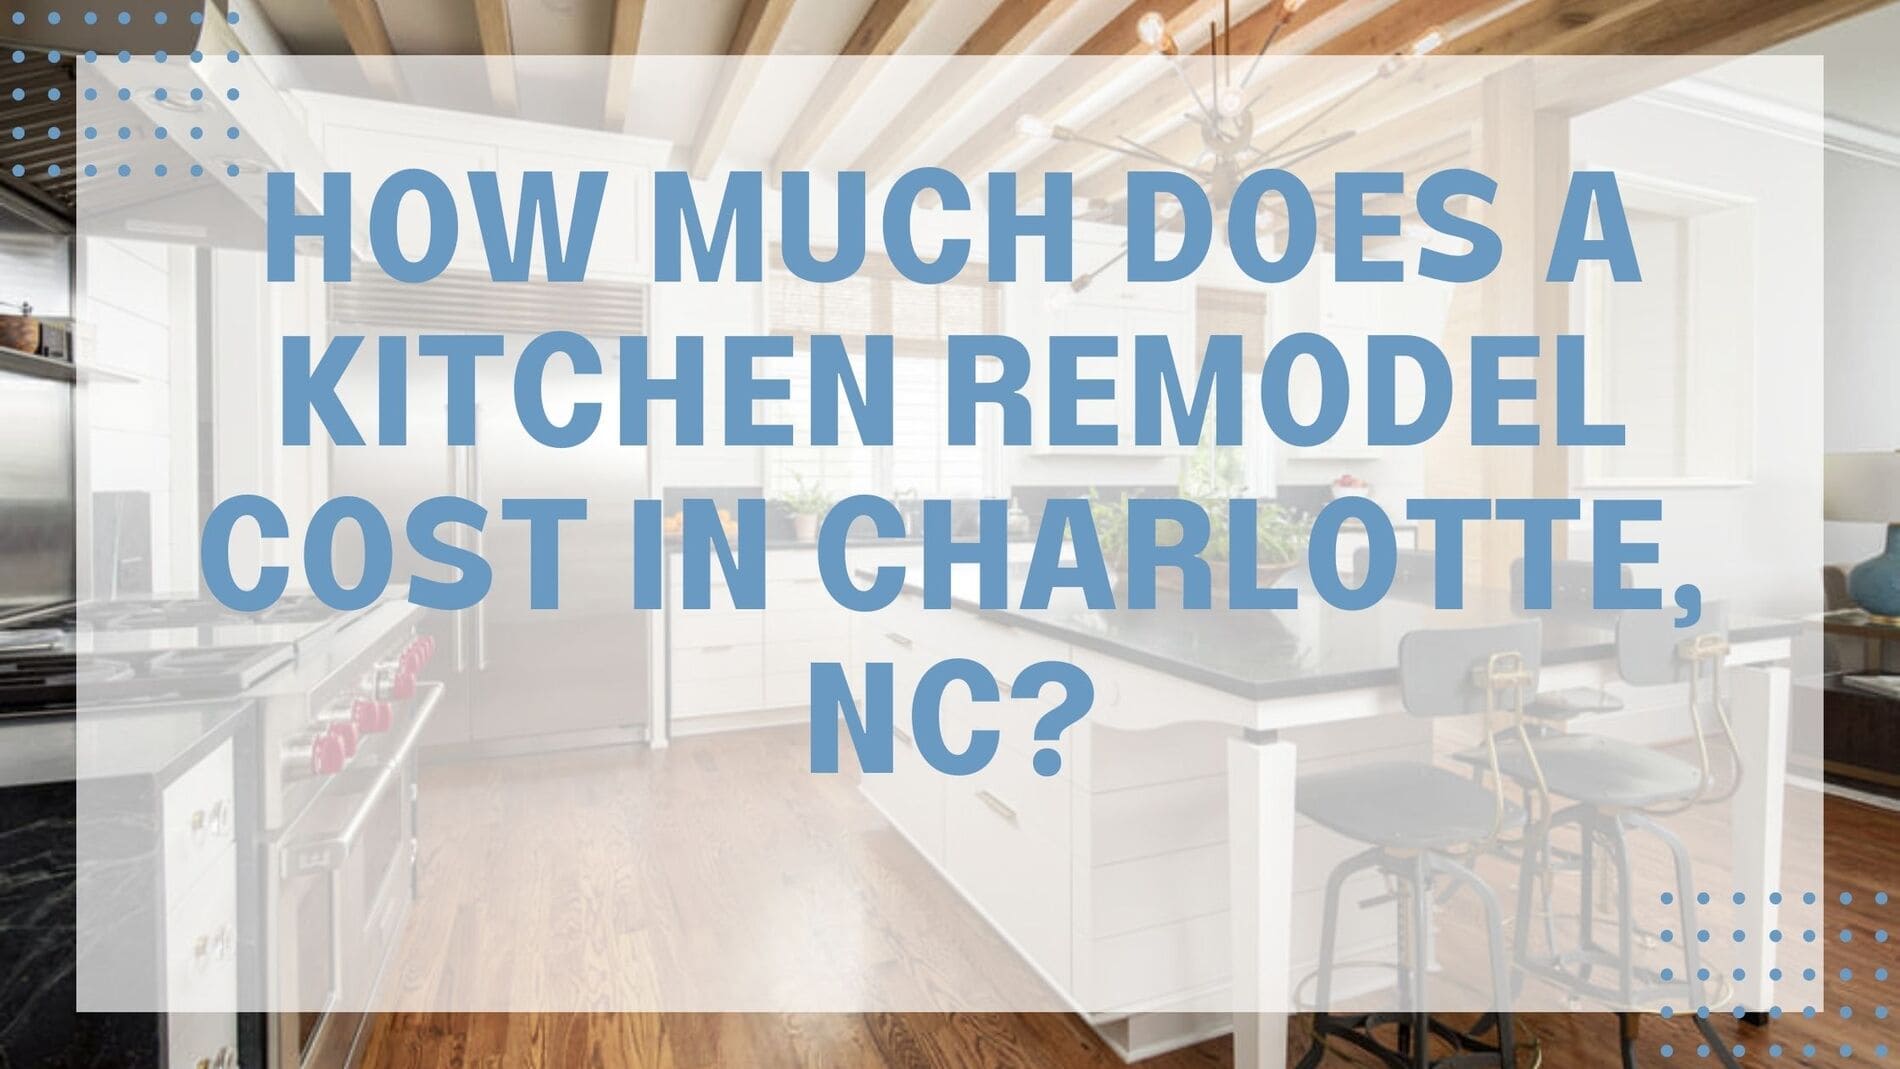 How Much Does a Kitchen Remodel Cost in Charlotte, NC?